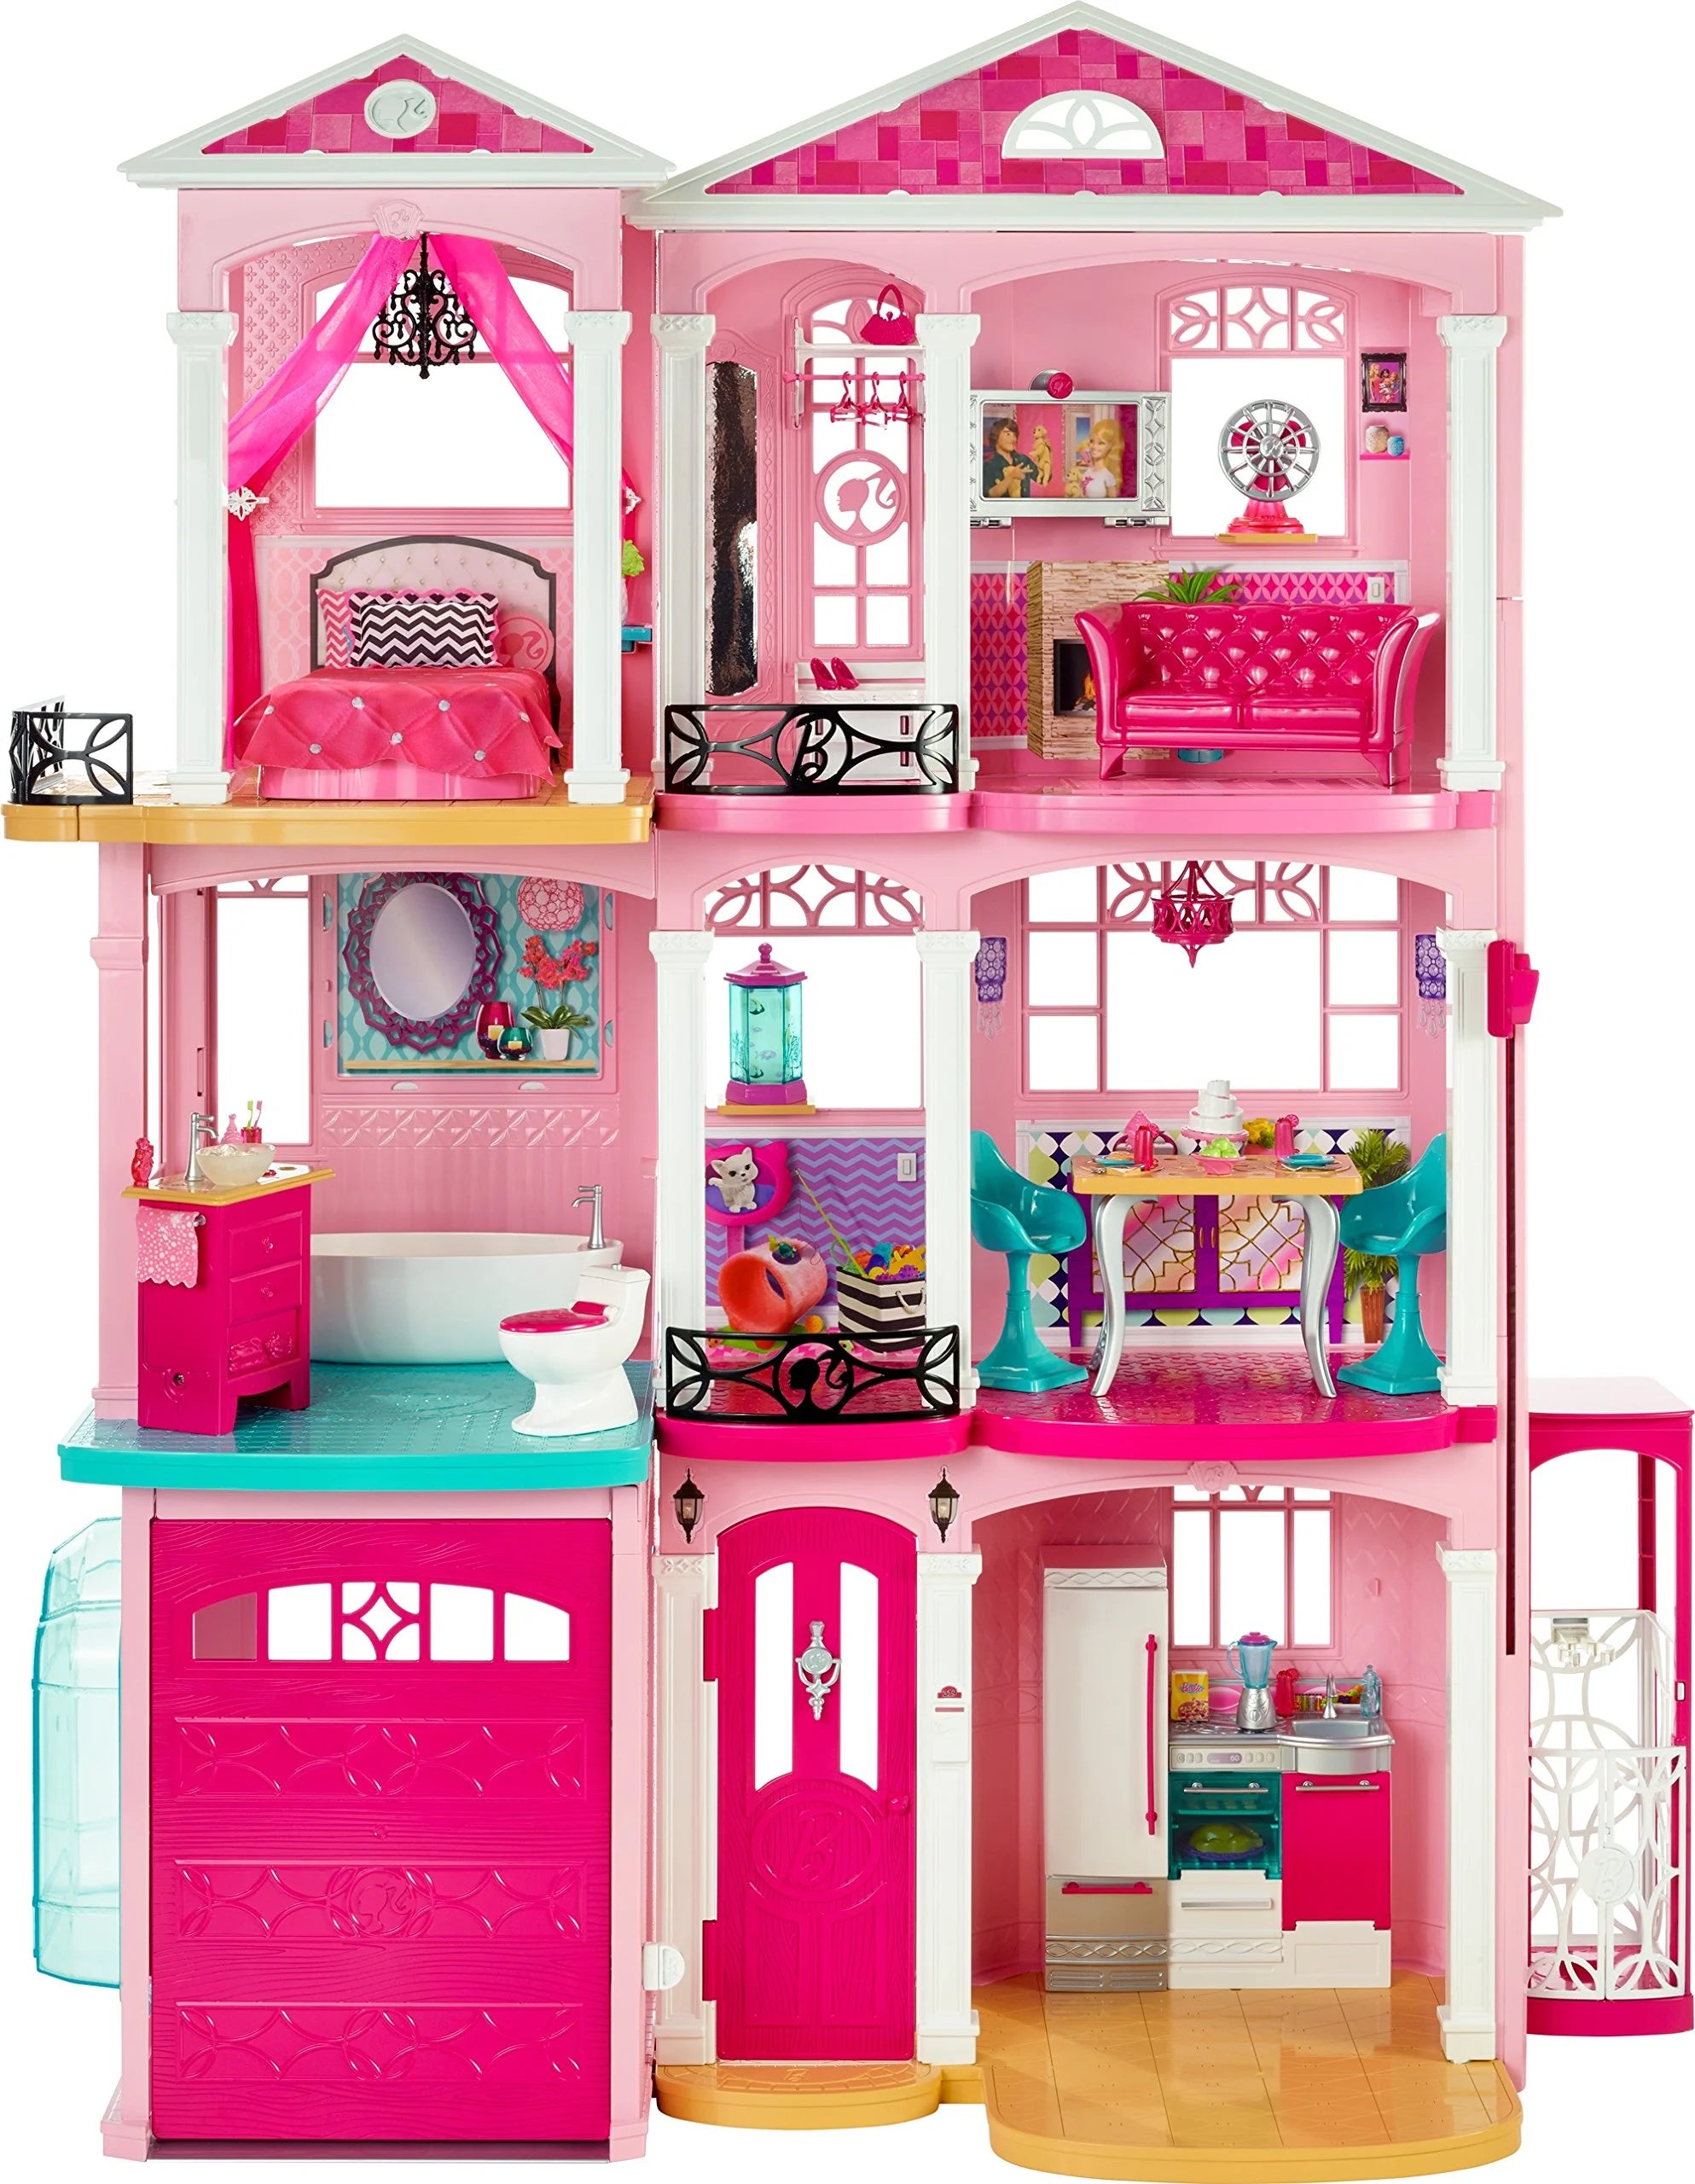 Pink Barbie Dream House to Make Fairy into Reality